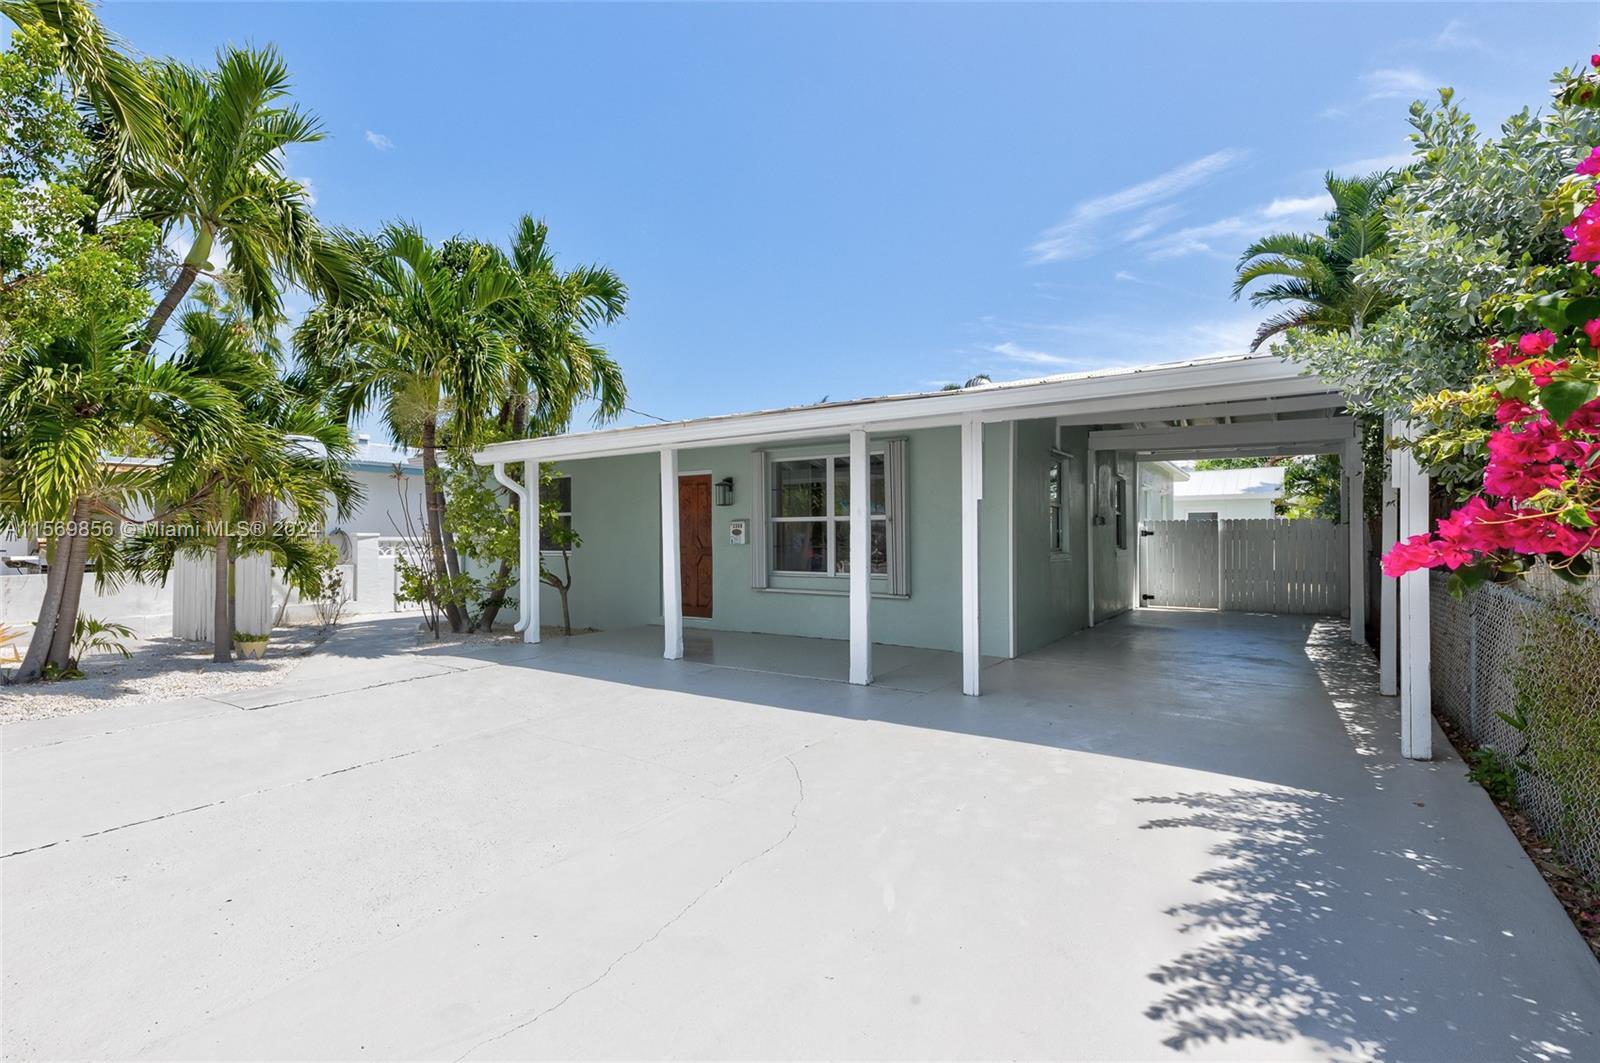 Photo of 2308 Patterson Ave in Key West, FL